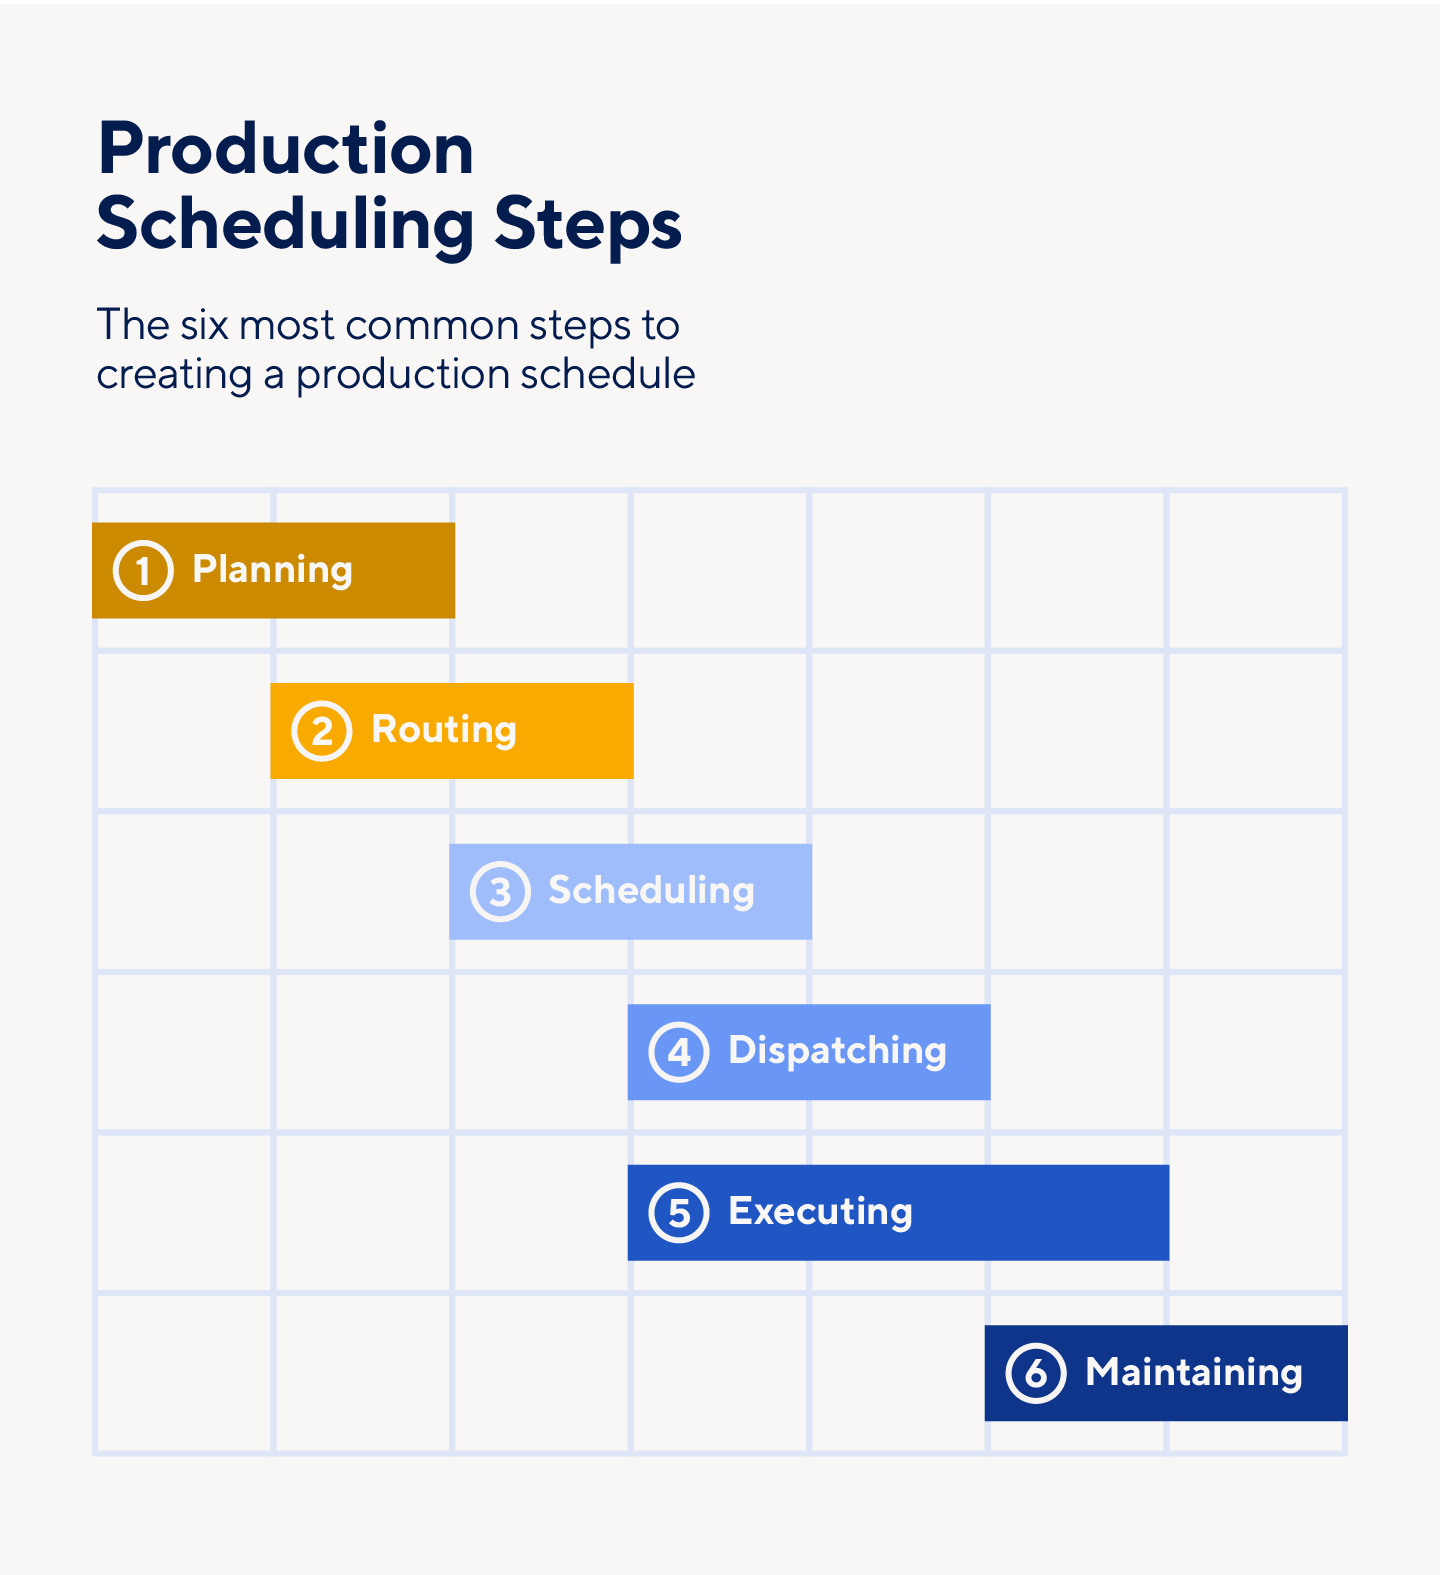 Common production scheduling steps including planning, executing, and maintaining.